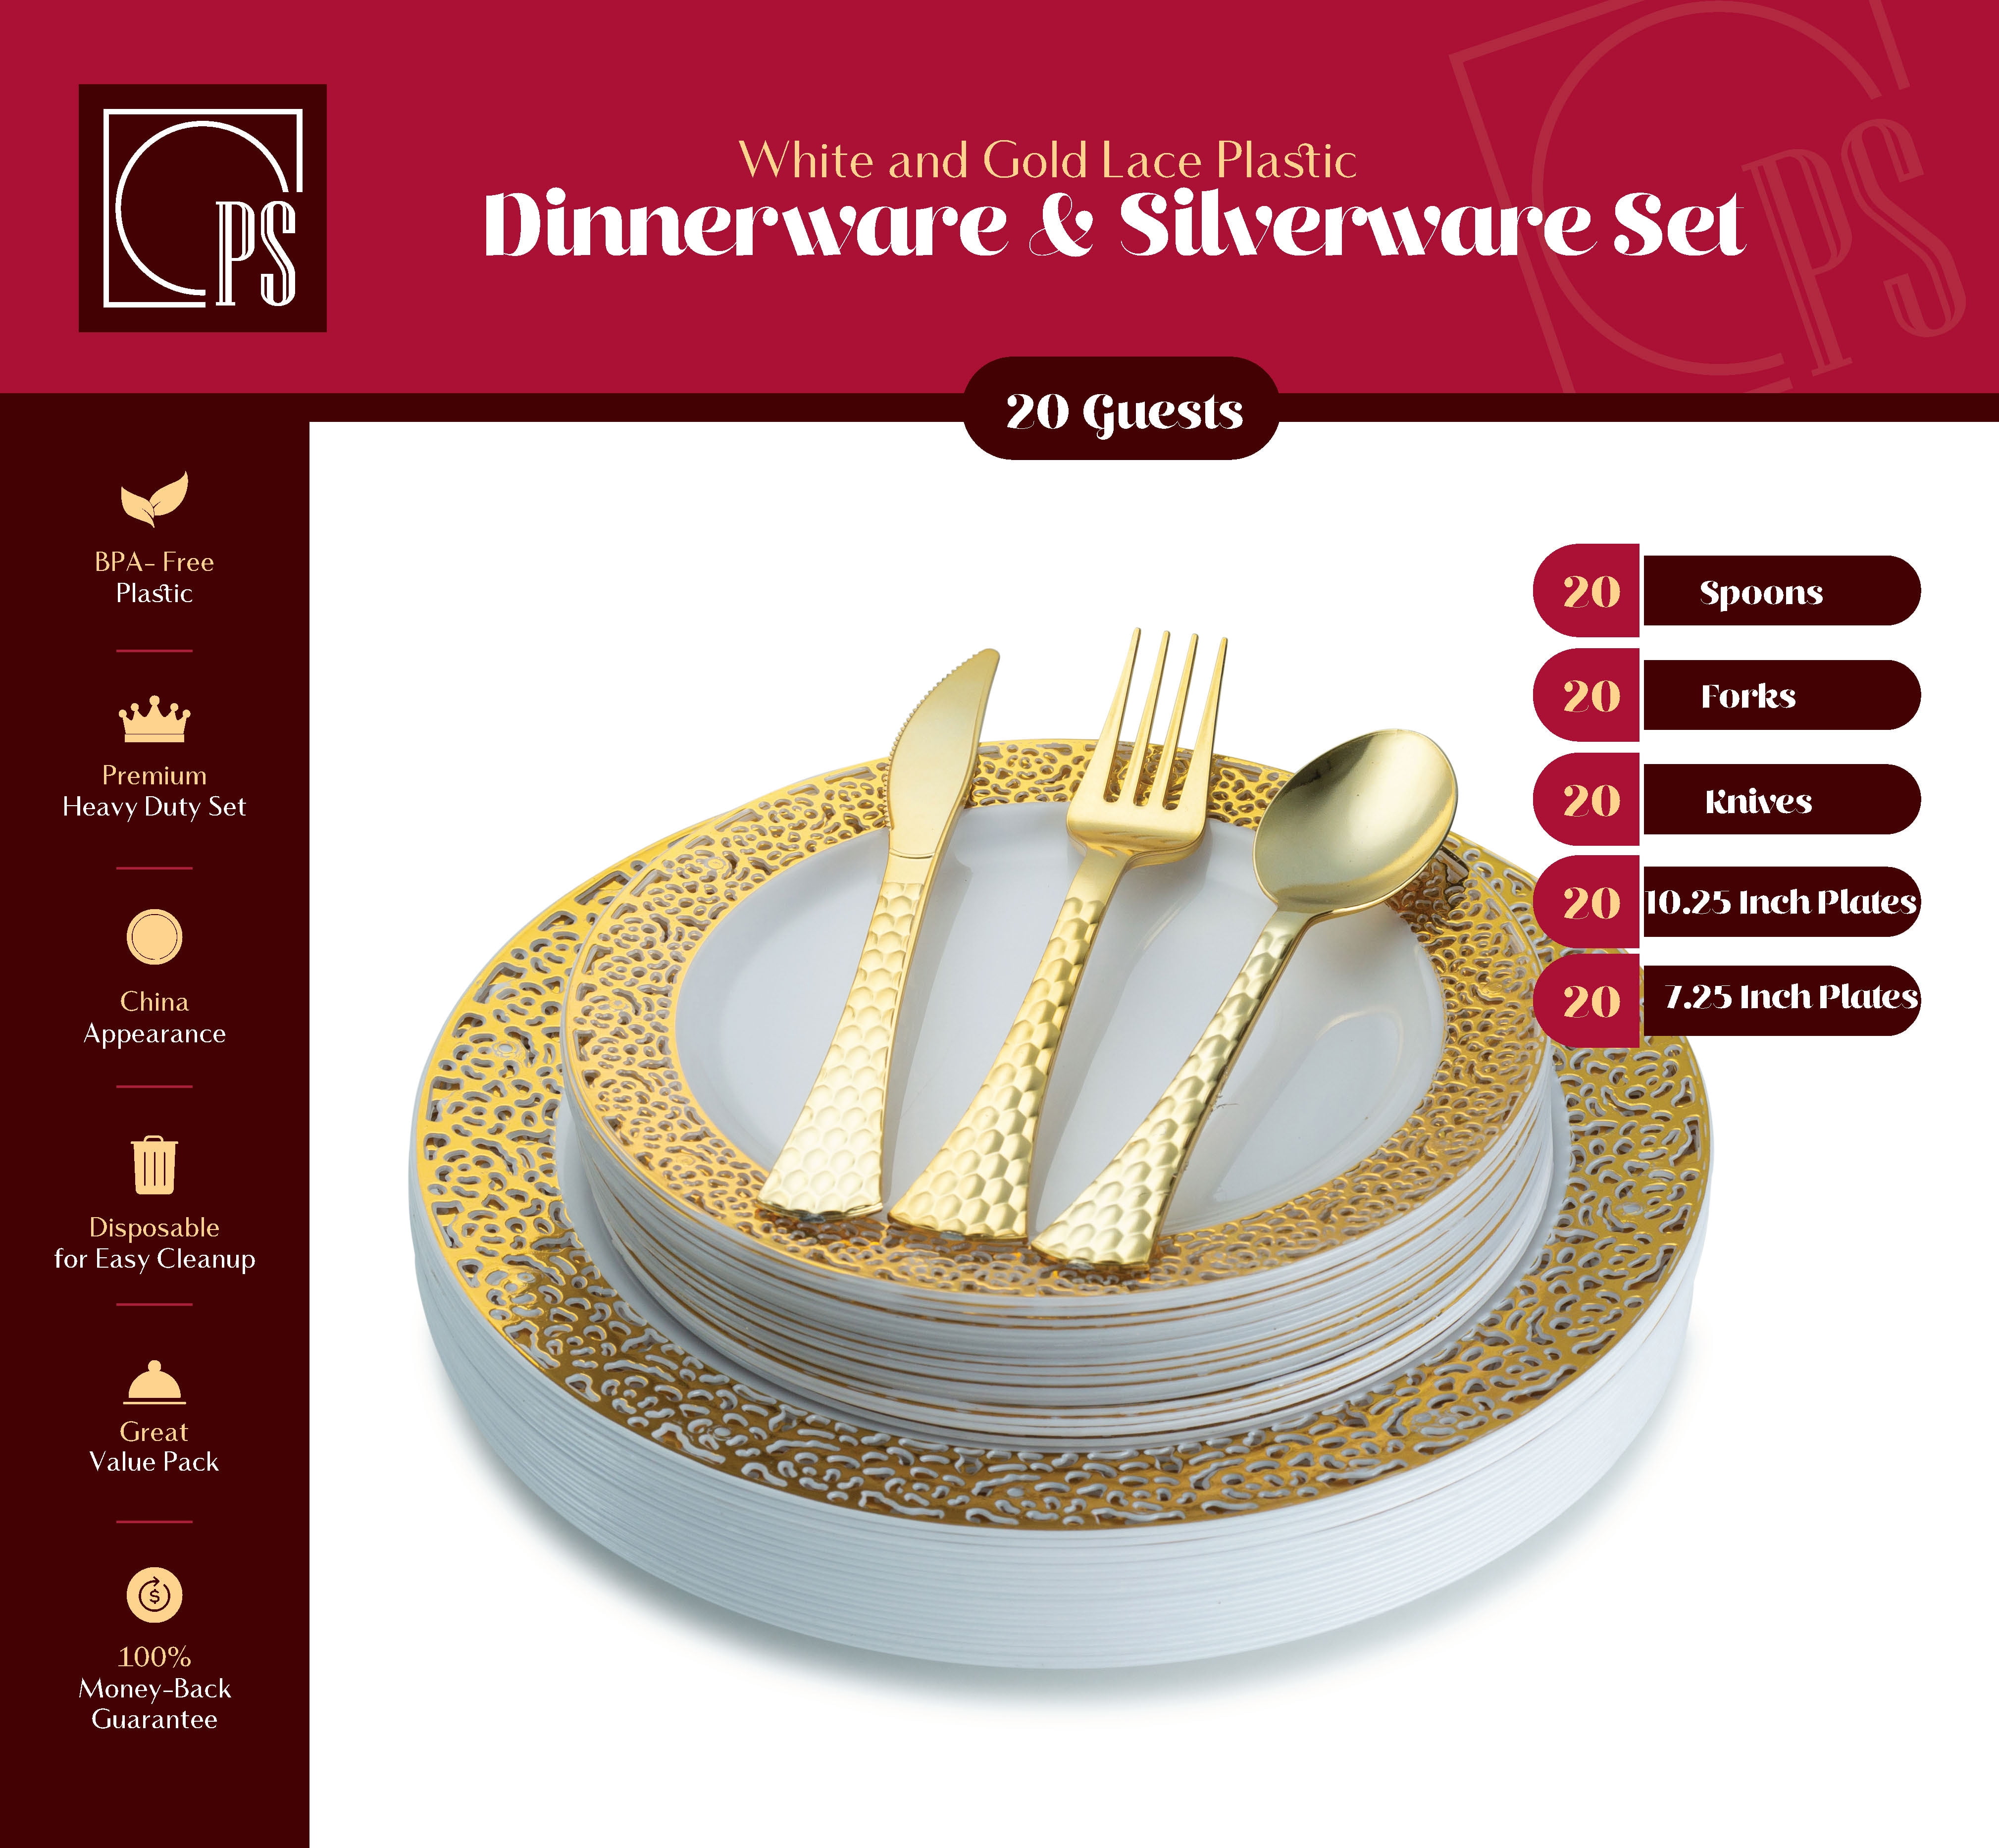 Gold Plastic Silverware: 250 Piece Set with 100 Forks, 50 Knives, 50  Spoons, and 50 Mini Spoons – Select Settings